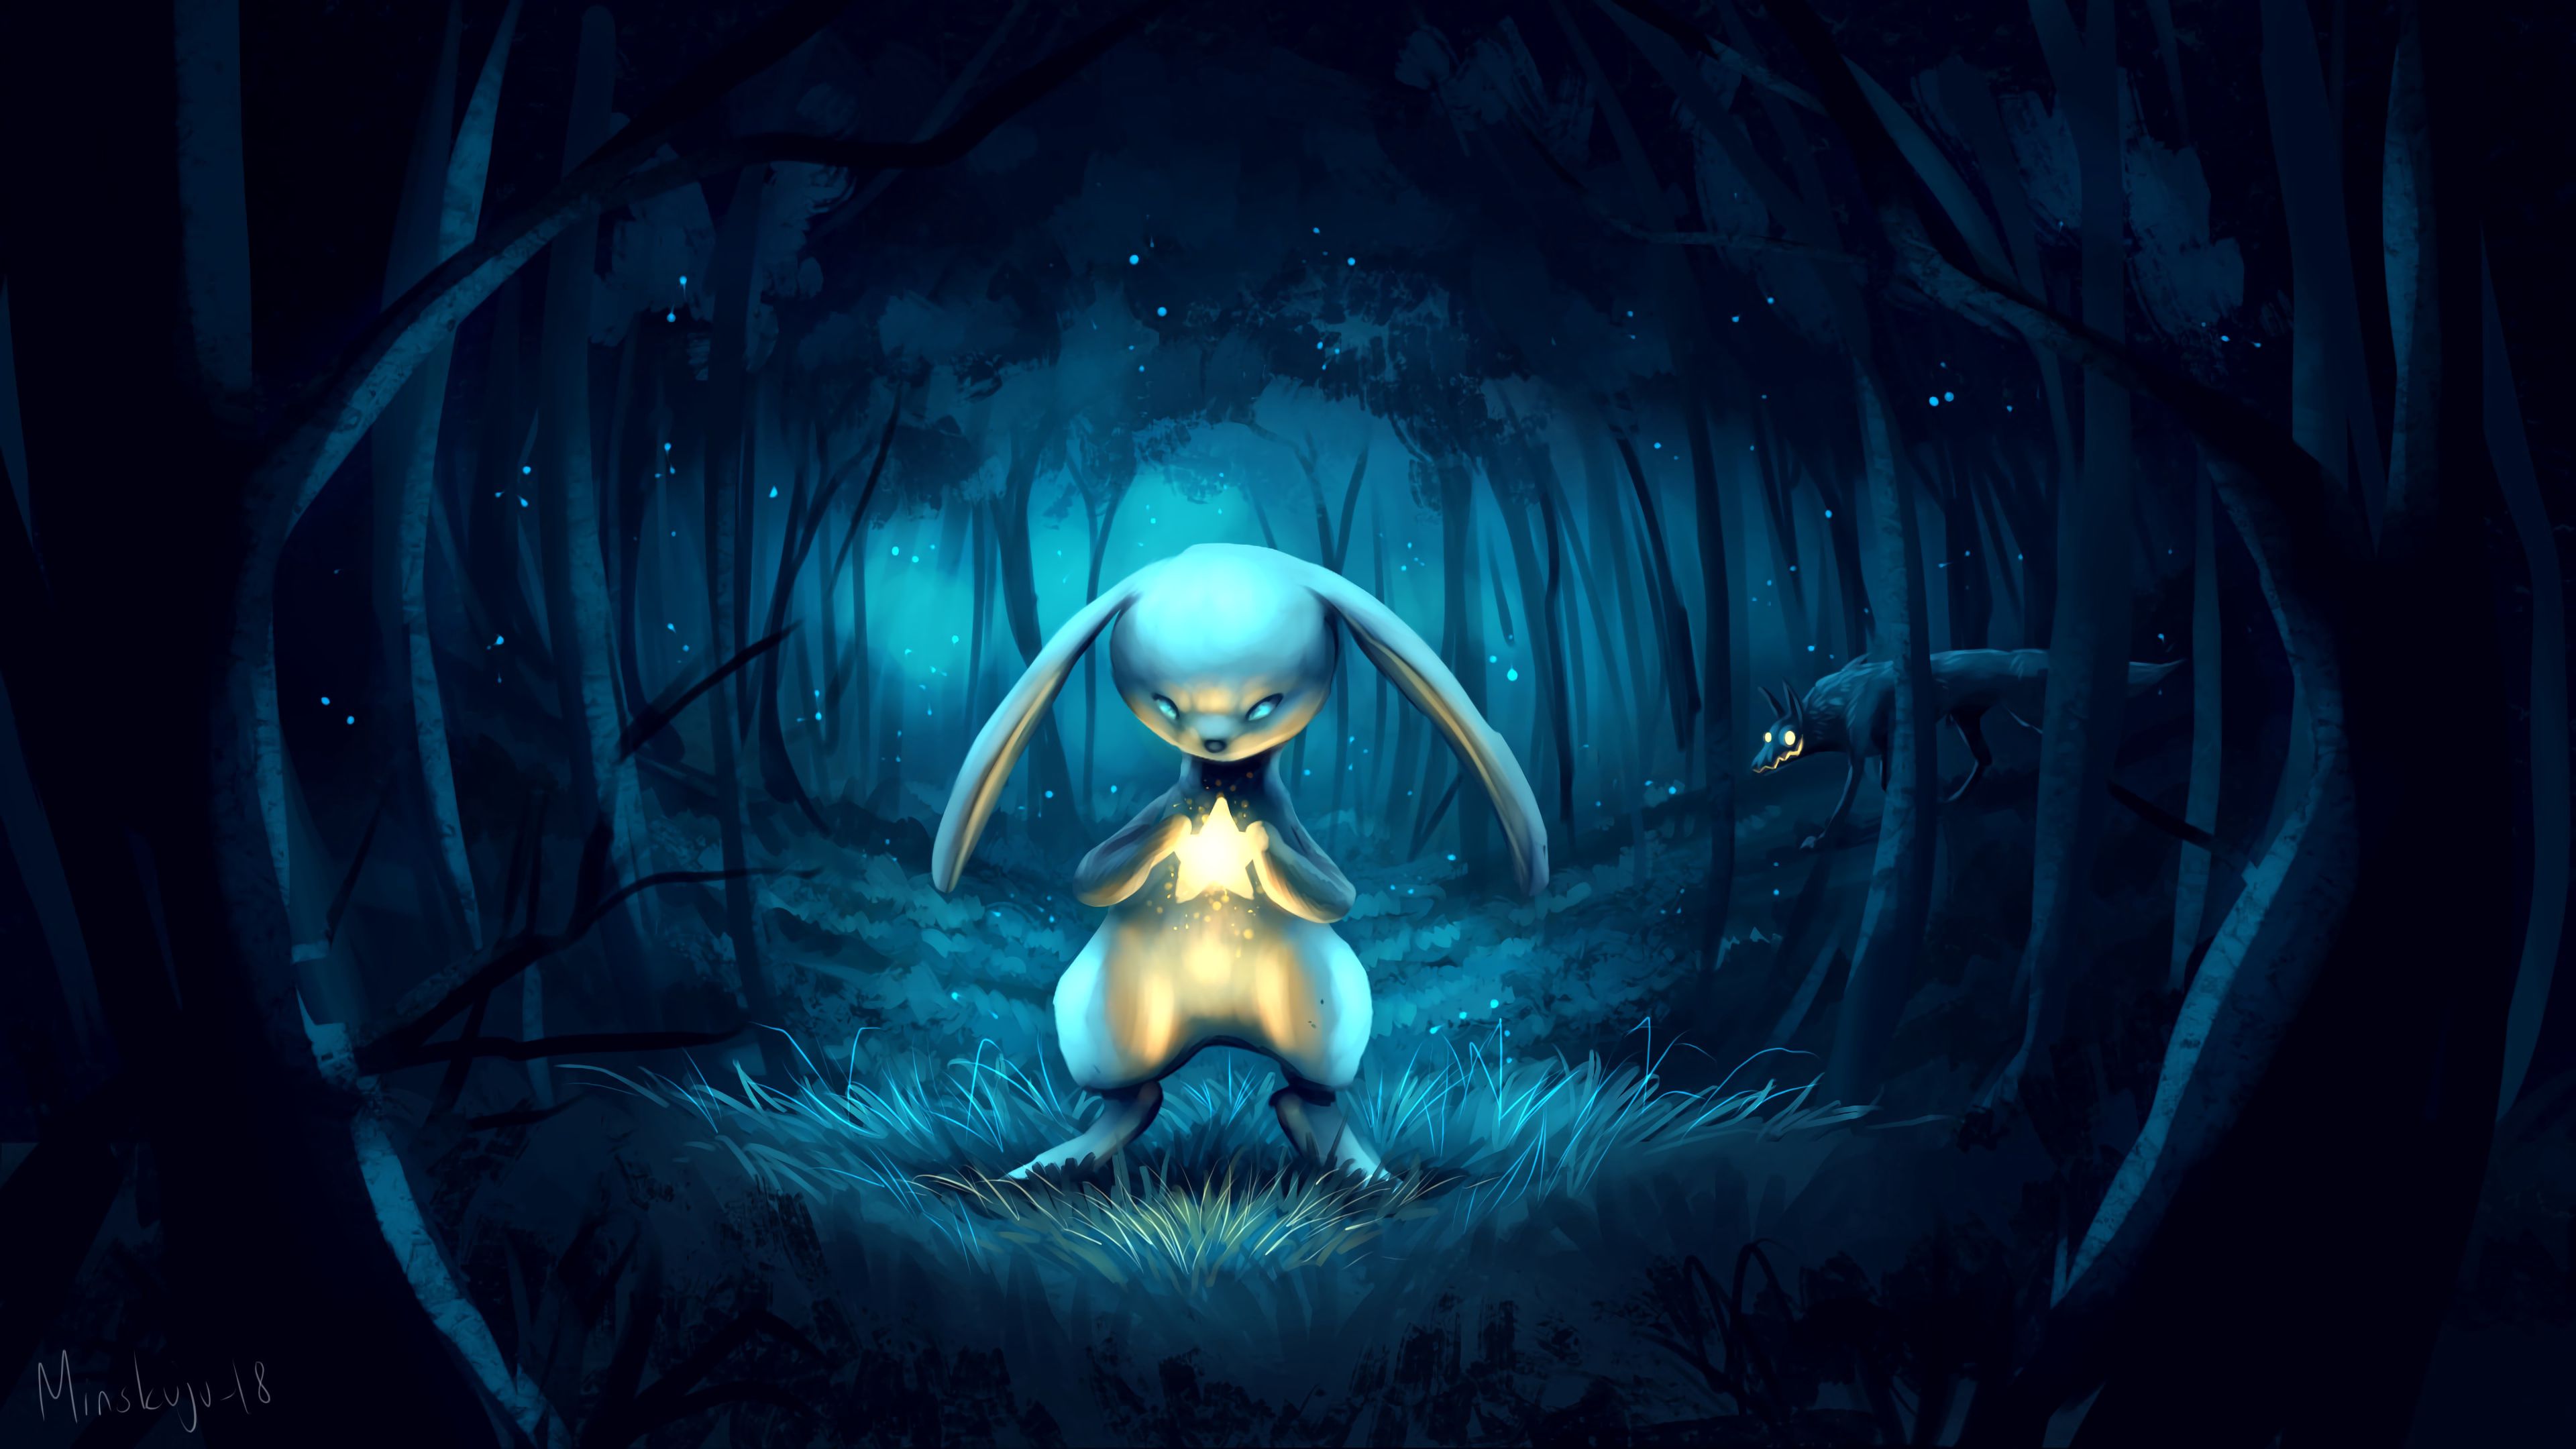 Phone Wallpaper (No watermarks) hare, forest, stars, fabulous